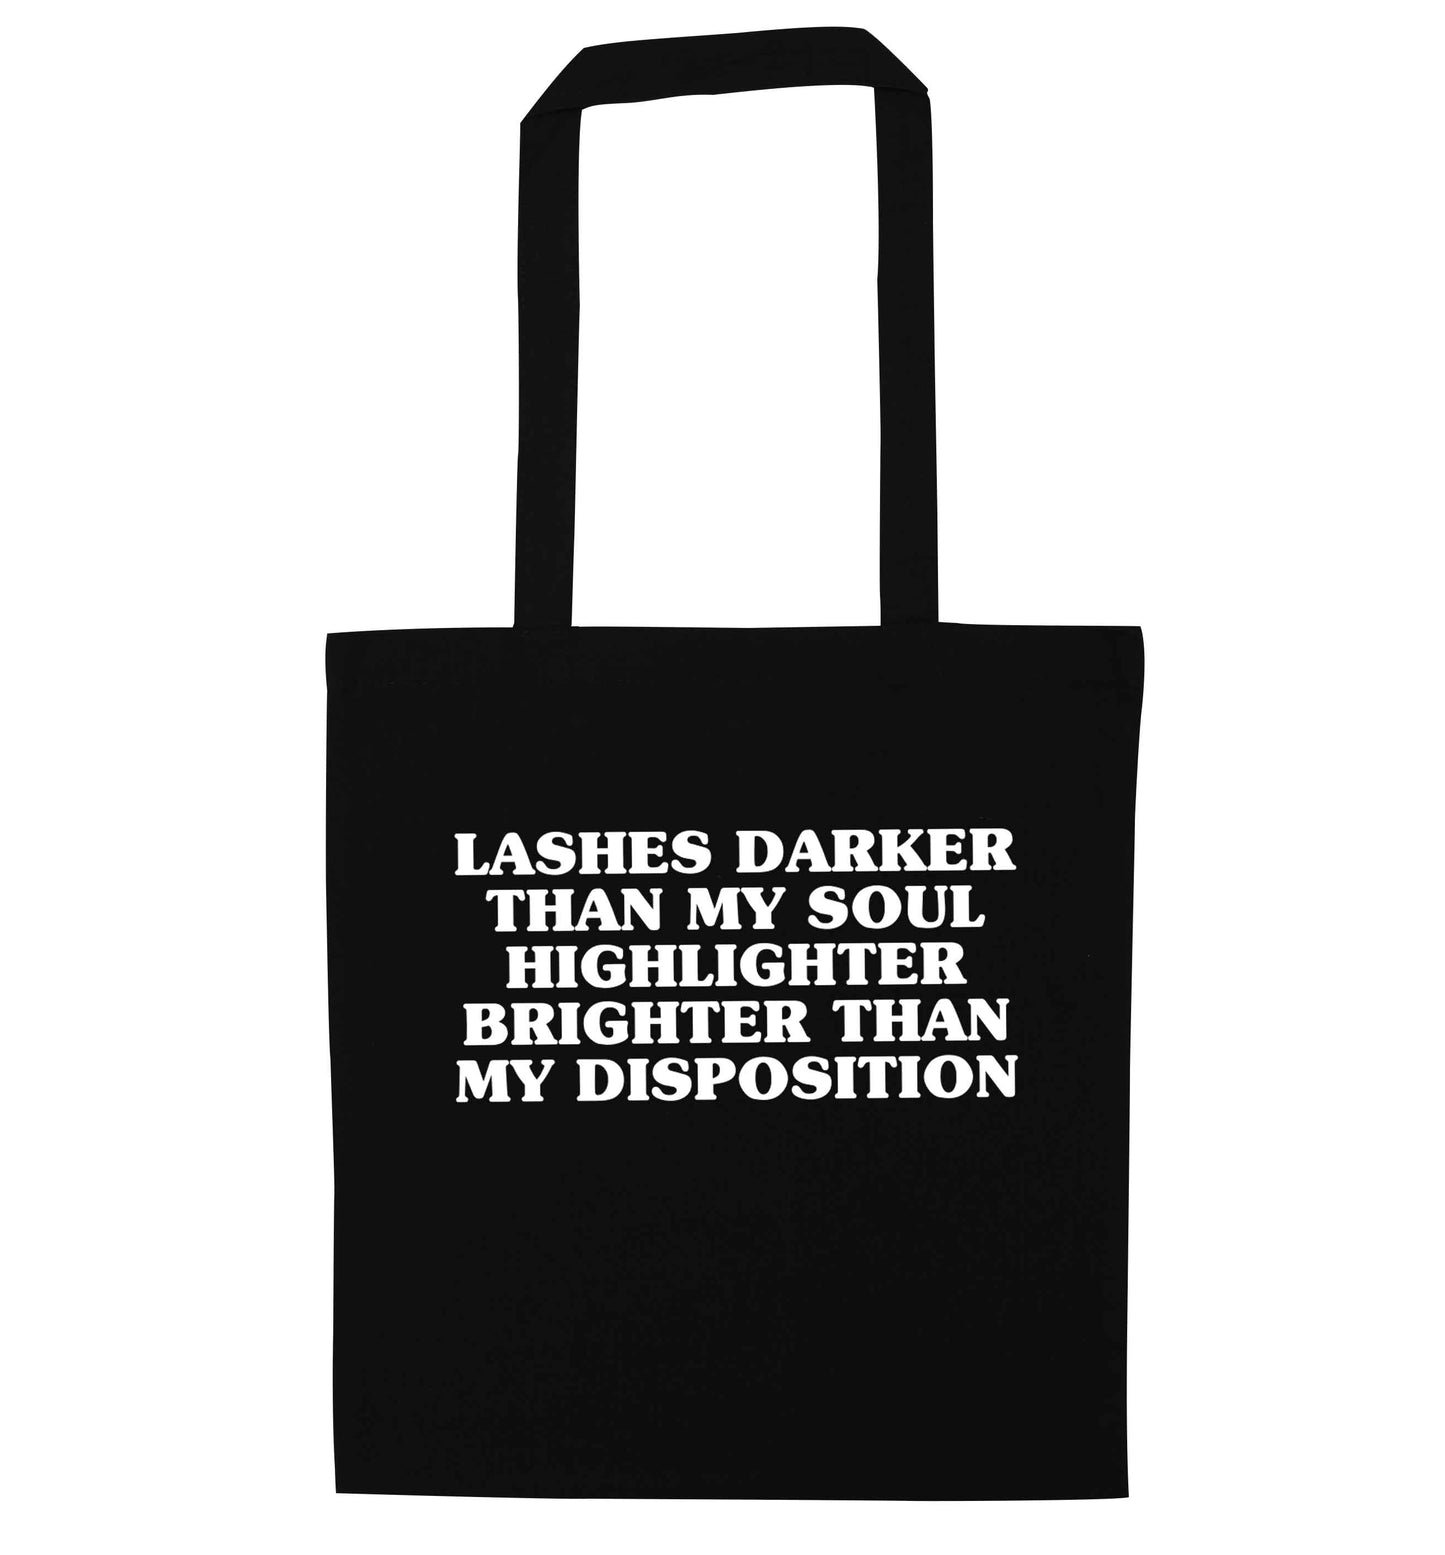 Lashes darker than my soul, highlighter brighter than my disposition black tote bag